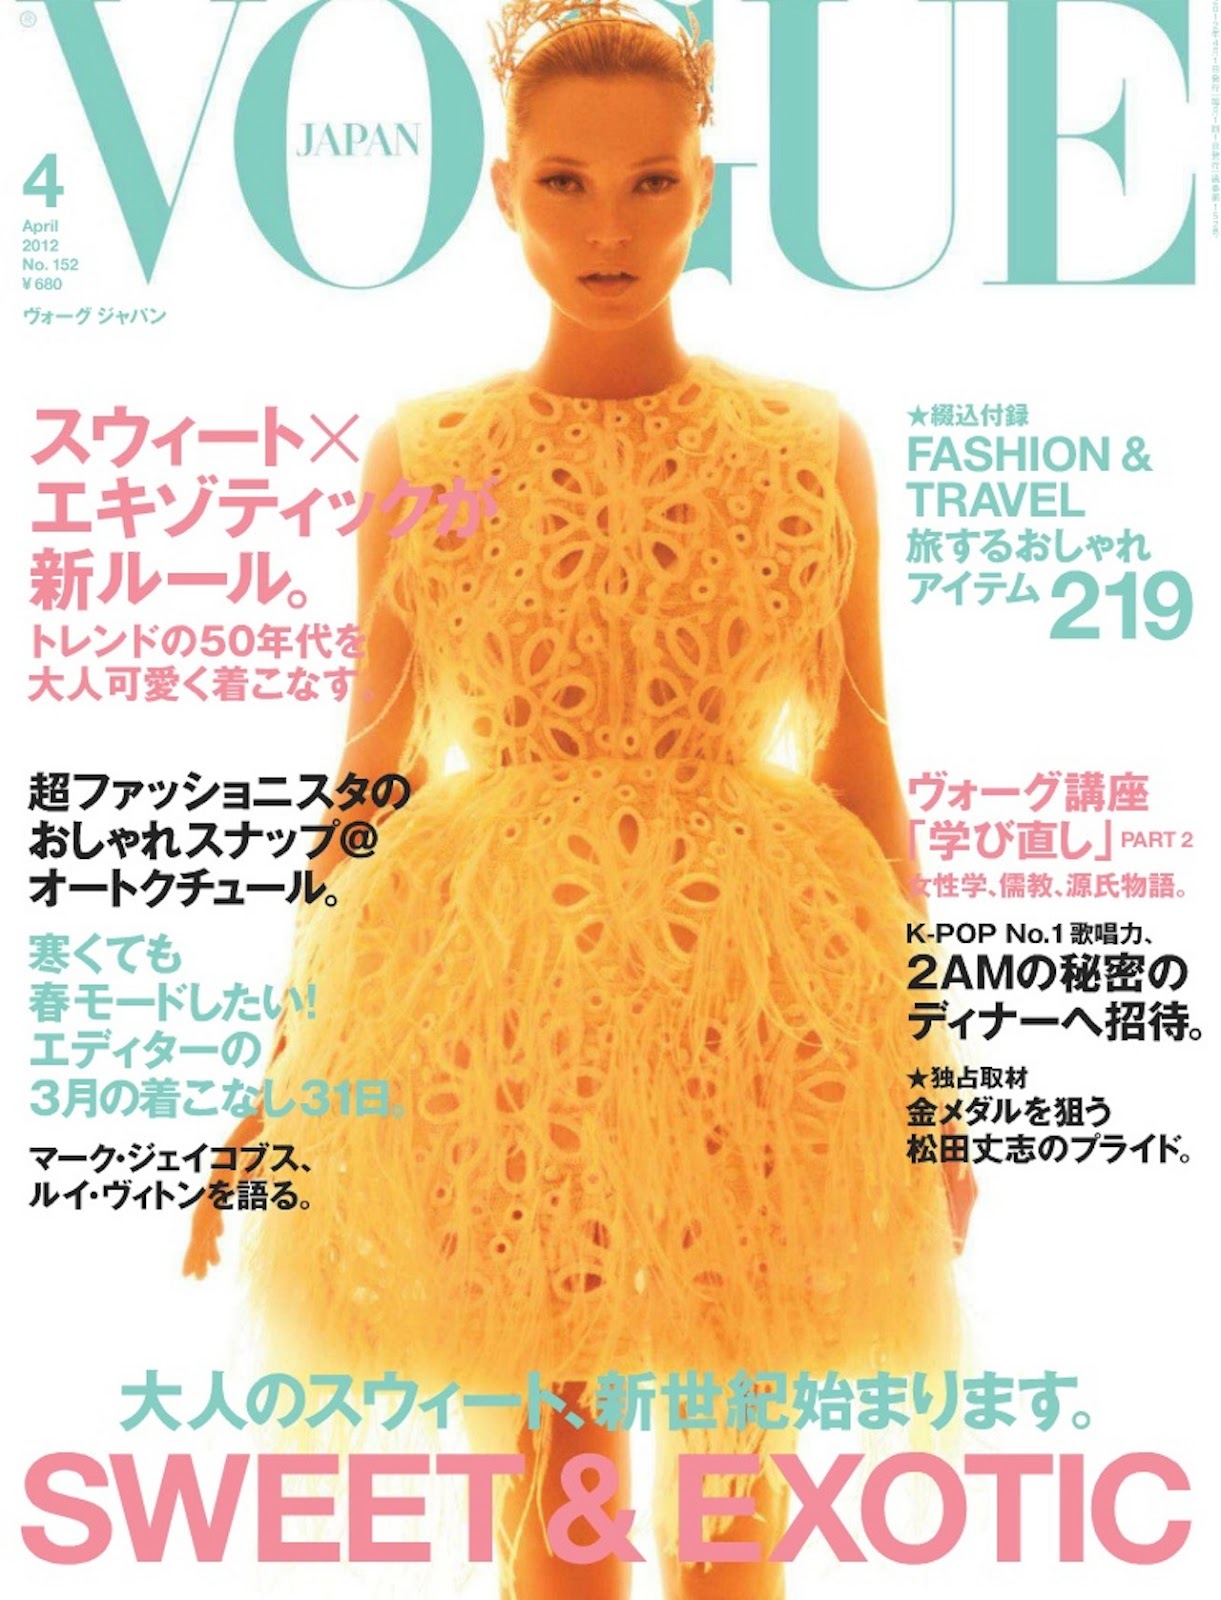 kate moss by mert and marcus for vogue japan april 2012 | visual ...